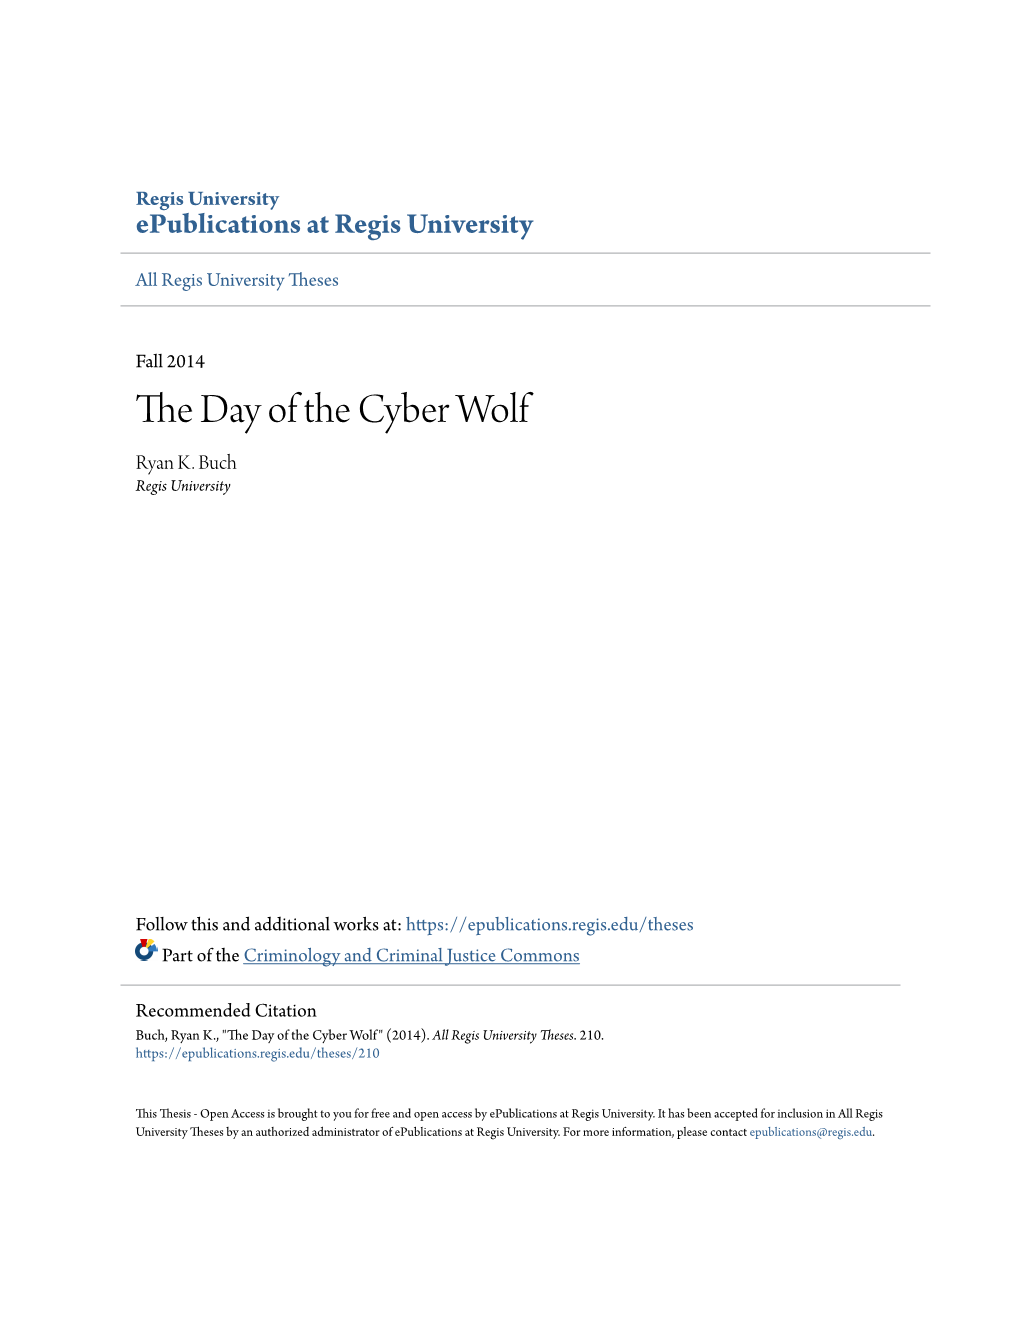 The Day of the Cyber Wolf